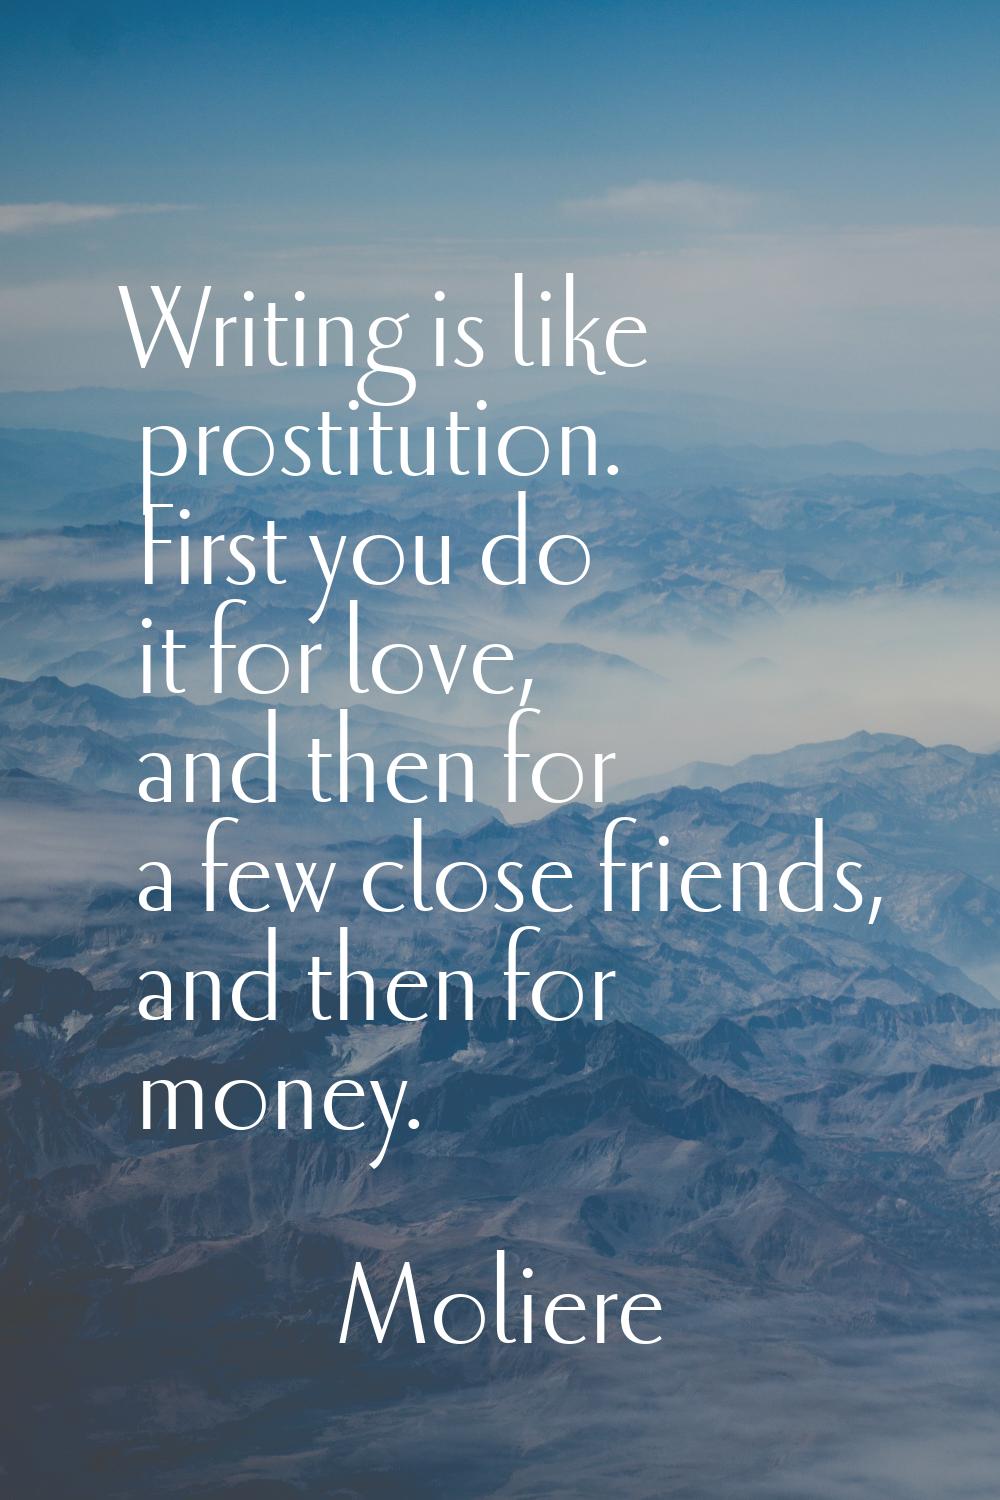 Writing is like prostitution. First you do it for love, and then for a few close friends, and then 